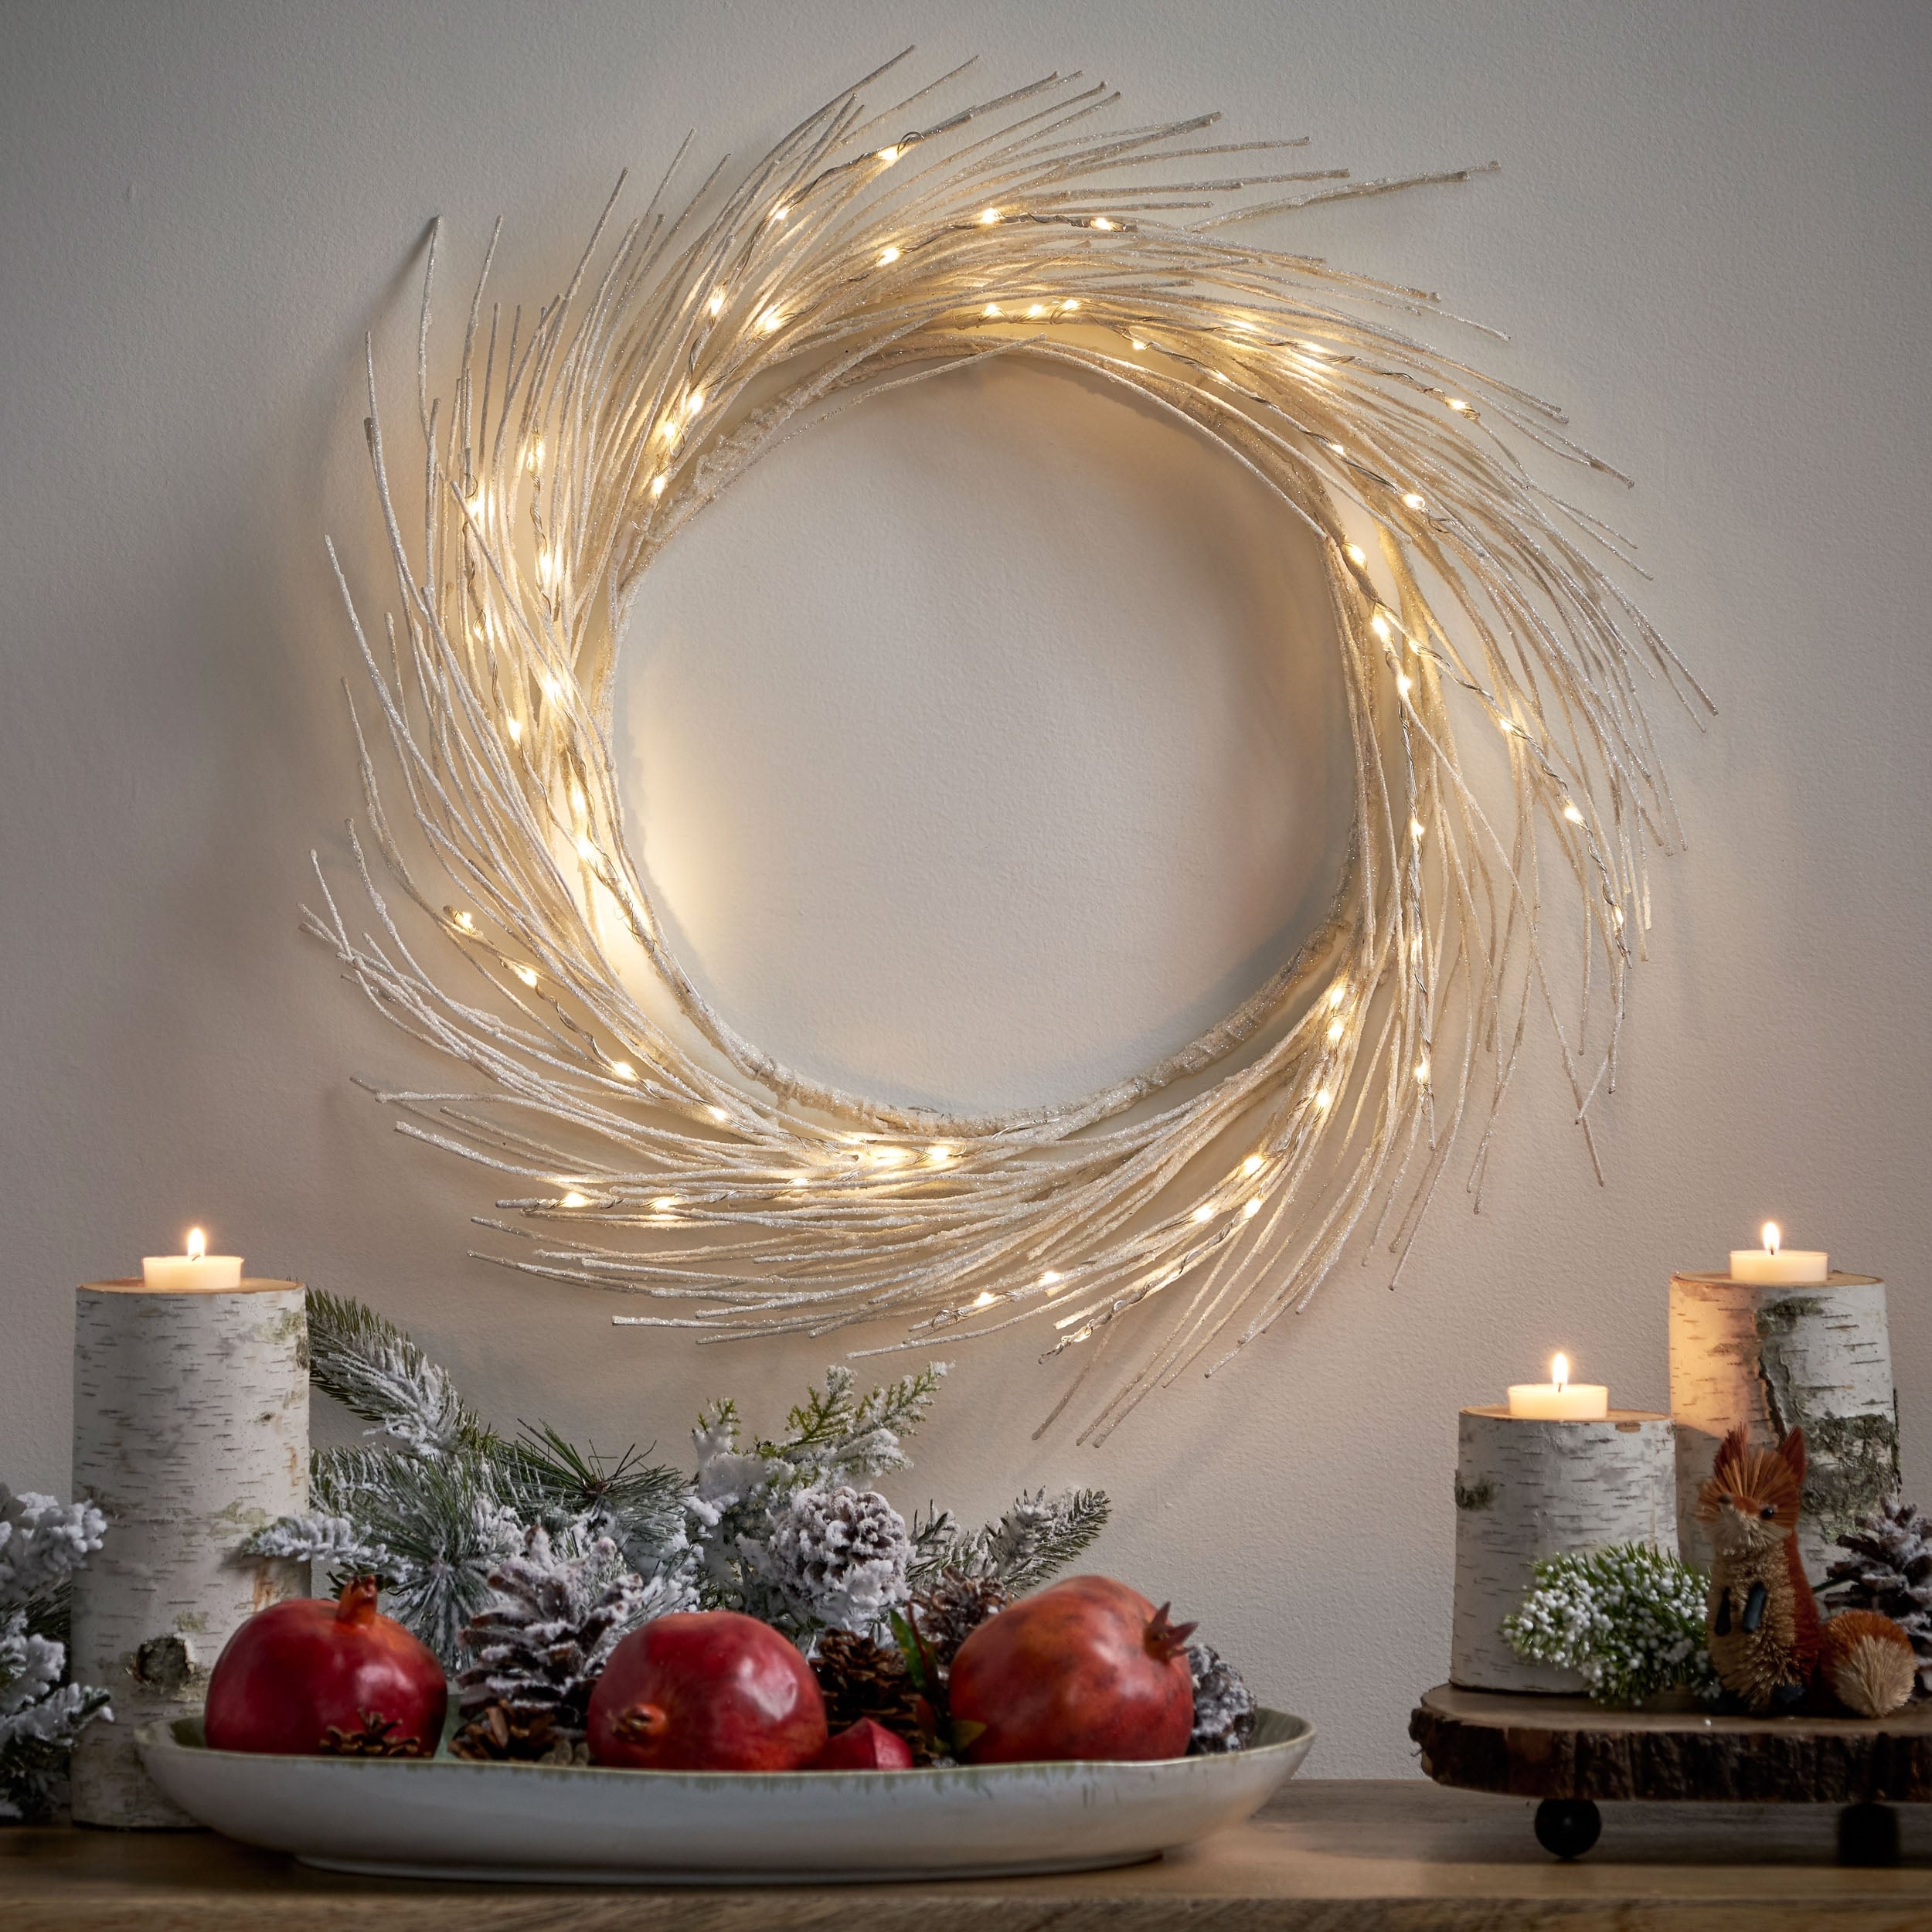 https://ak1.ostkcdn.com/images/products/is/images/direct/61446c2fd0cabad753ce72518954ee151f9bc15a/Reese-24%22-Pre-lit-Warm-White-LED-Christmas-Wreath.jpg